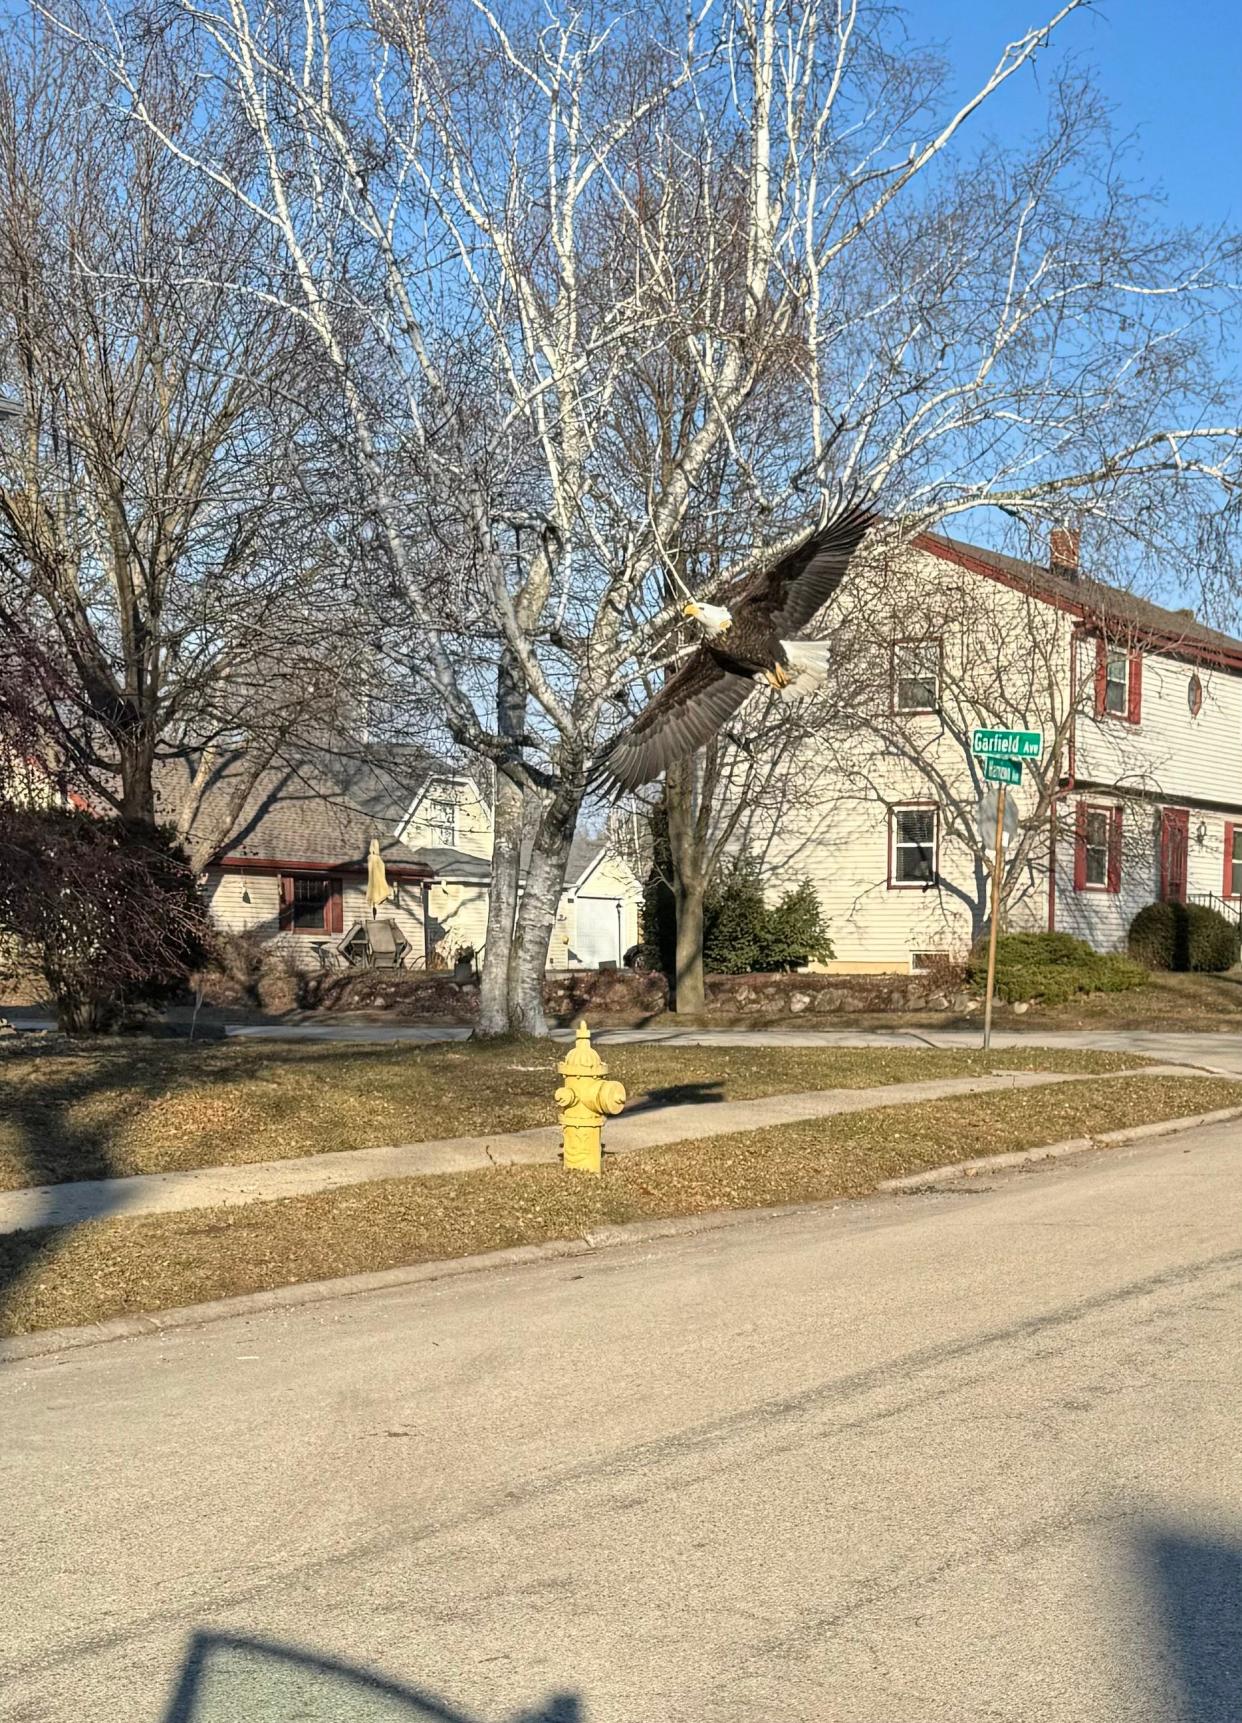 One in a pair of bald eagles seen soaring over Harrison Avenue east of Grand Avenue in Waukesha touches down briefly near Garfield Avenue before flying away again on Feb. 17. The uncommon sight, while still a wonderment, is less surprising as bald eagles expand to nesting sites throughout the state, including Milwaukee suburban areas.